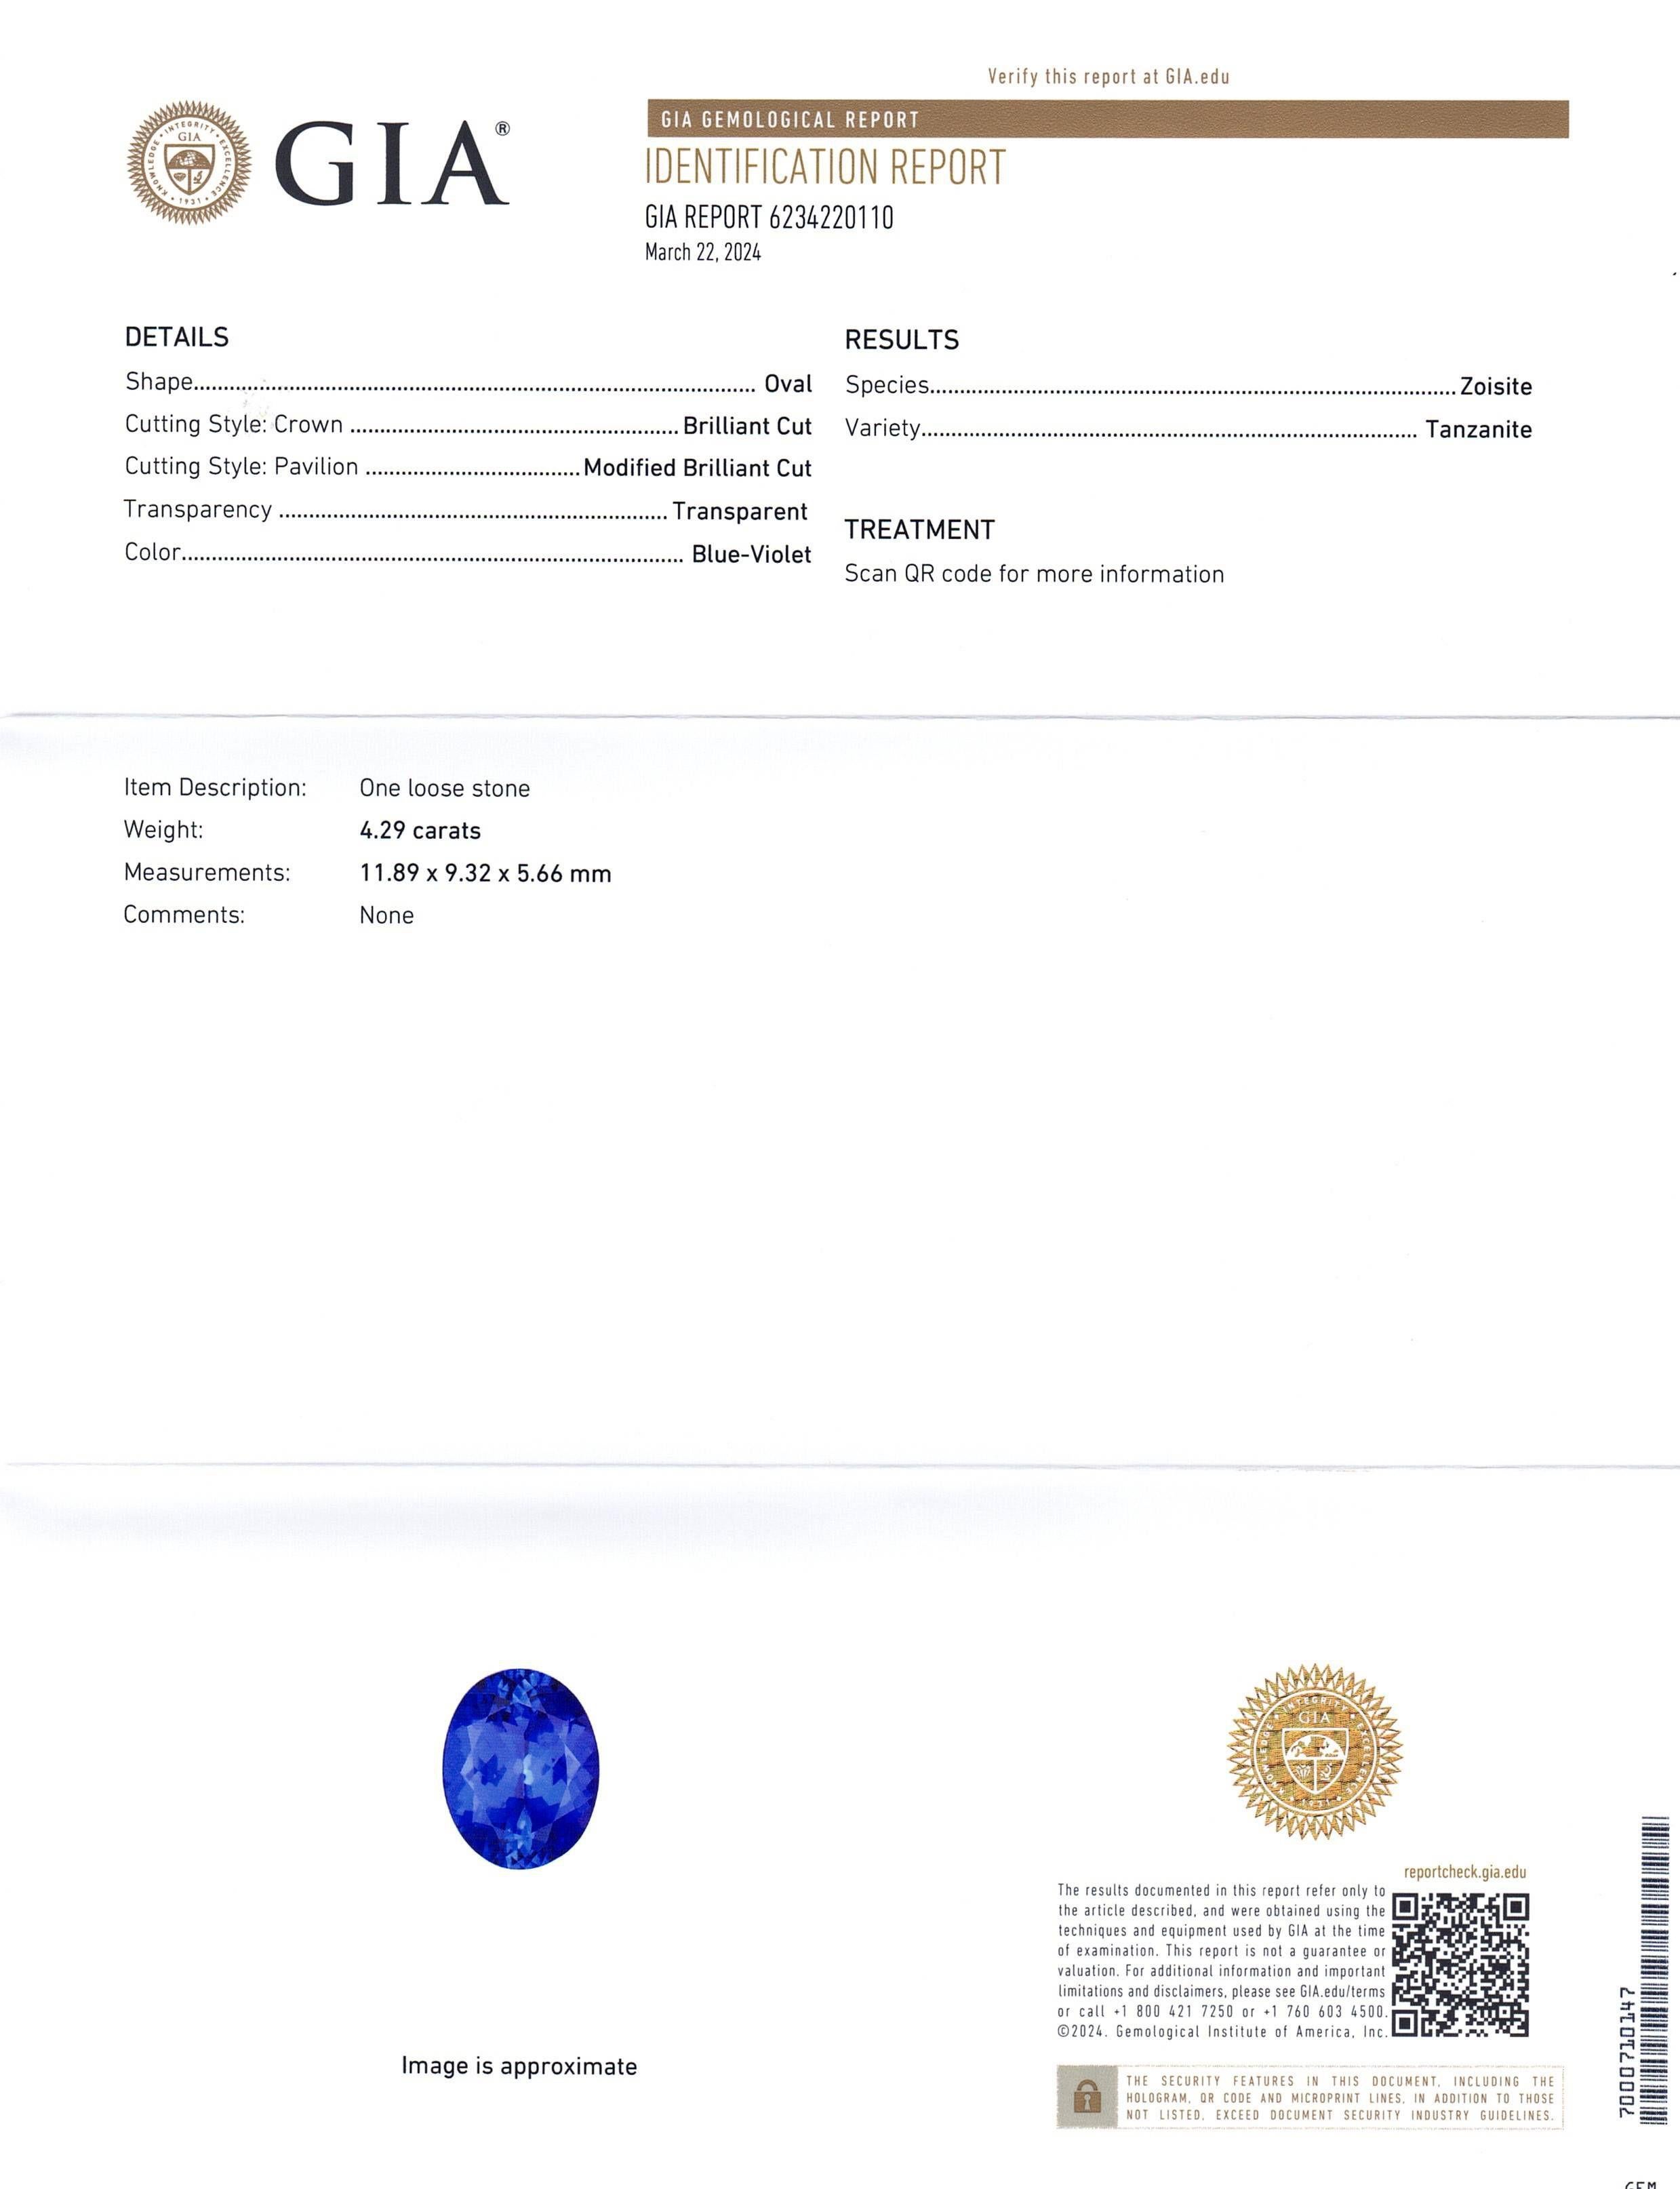 This is a stunning GIA Certified Tanzanite 


The GIA report reads as follows:

GIA Report Number: 6234220110
Shape: Oval
Cutting Style: 
Cutting Style: Crown: Brilliant Cut
Cutting Style: Pavilion: Modified Brilliant Cut
Transparency: